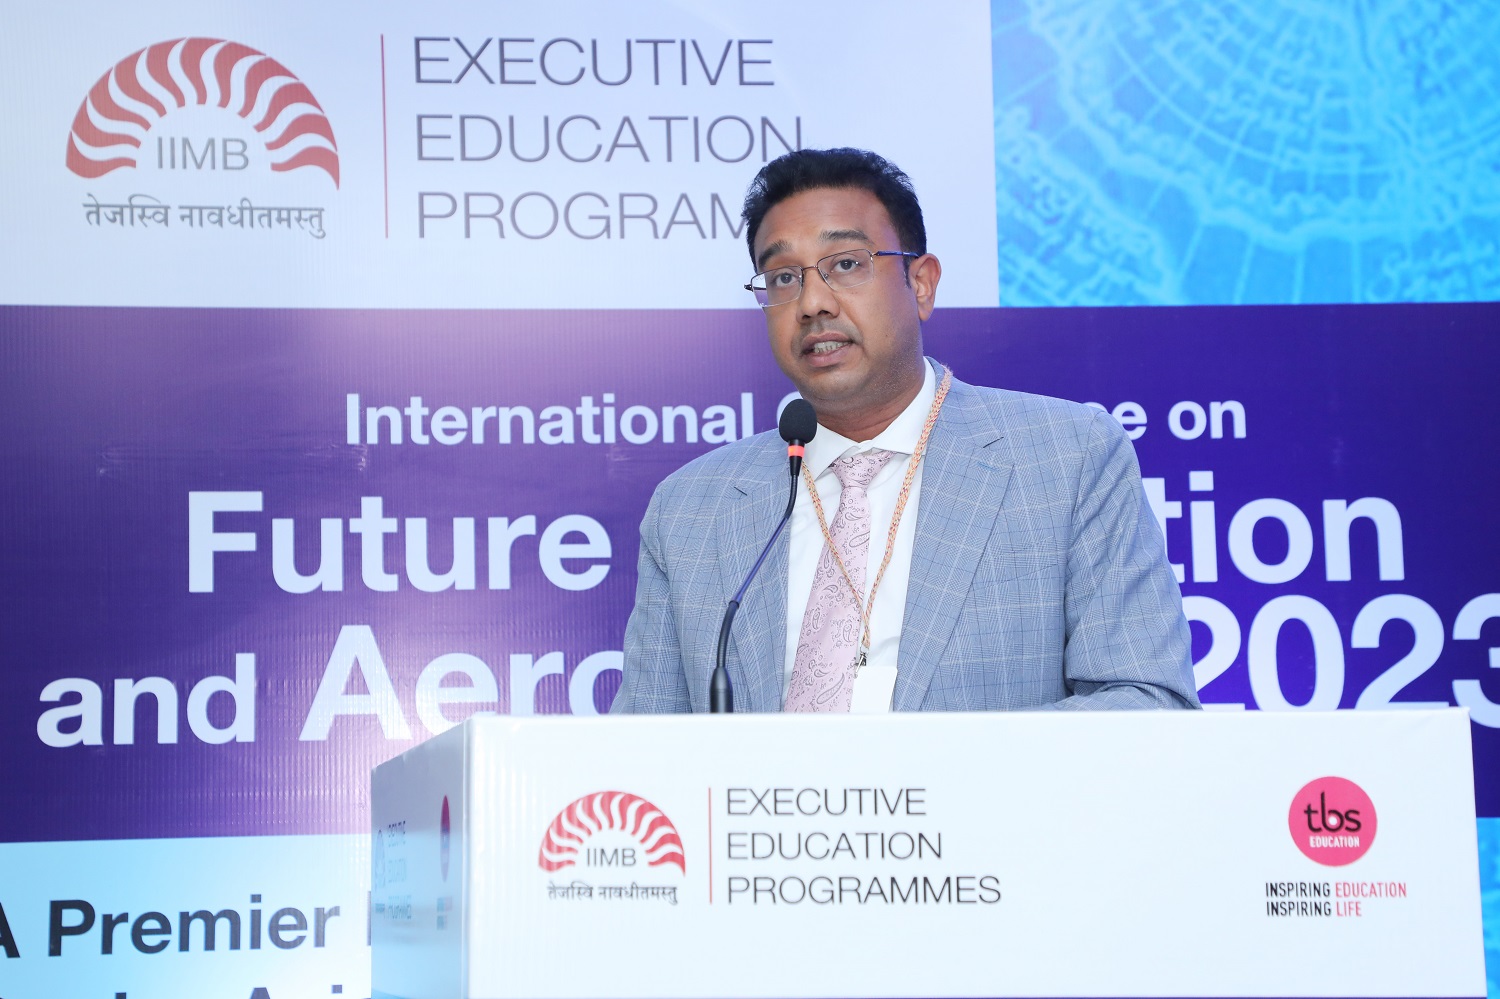 Mr. Chandra Shekhar Y, Sr. Director - Global Sourcing Strategy, GE Aviation, spoke on 'Future of Supply Chain in Aviation and Aerospace'.